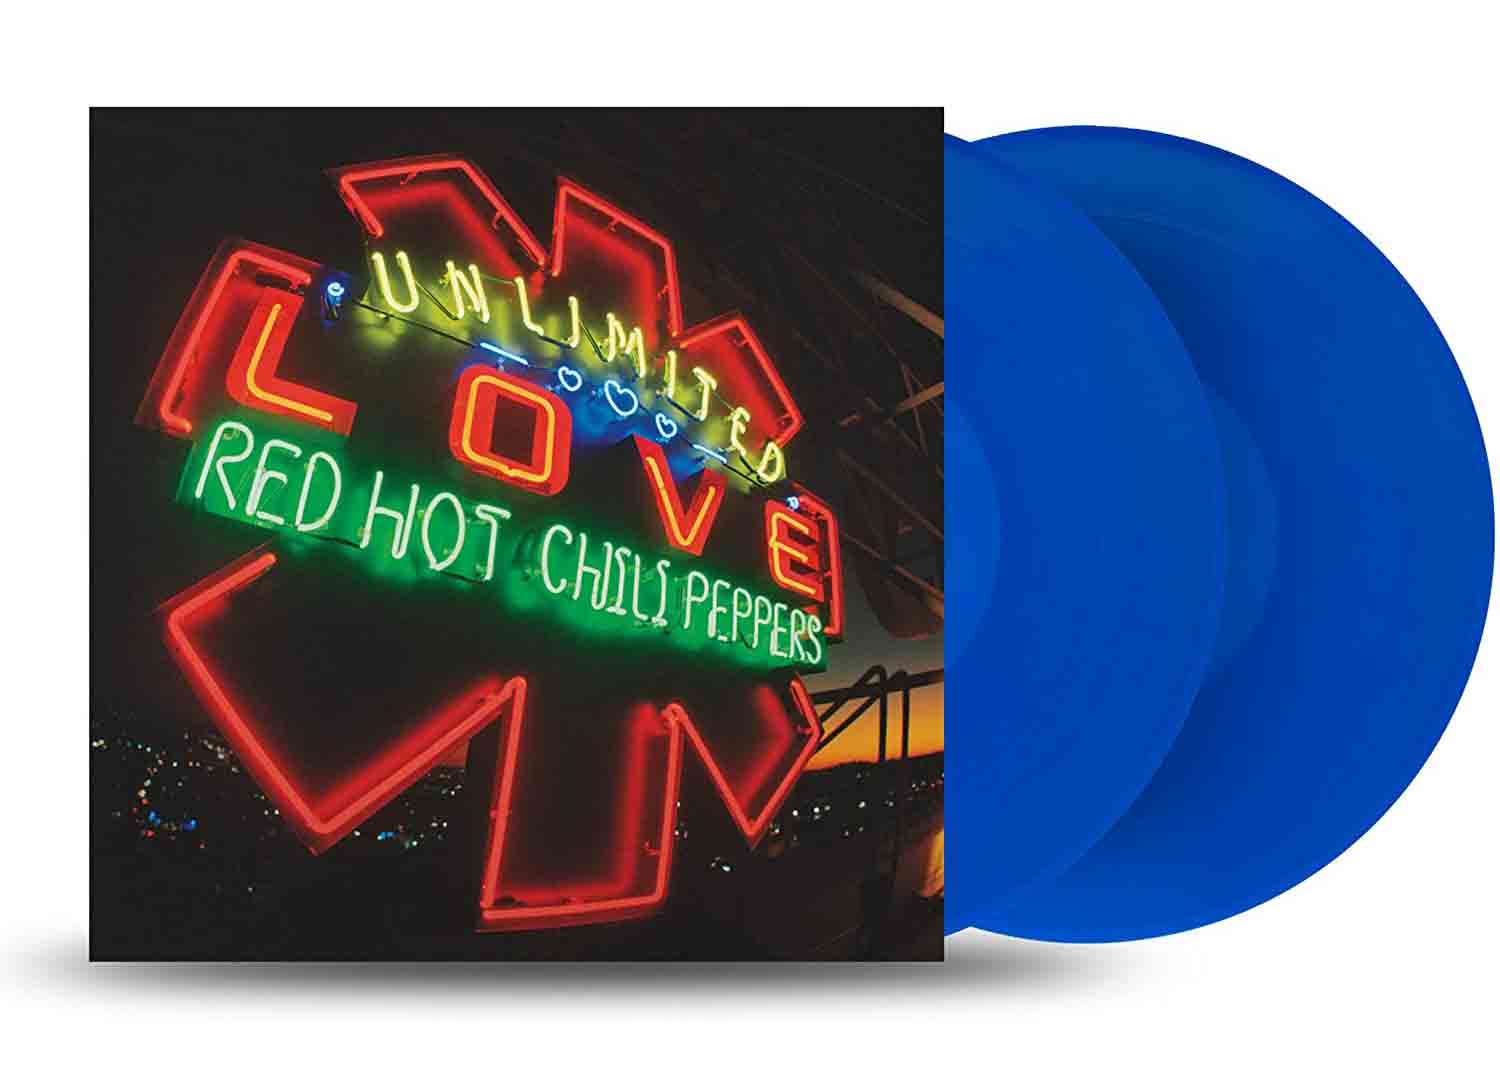 Red Hot Chili Peppers Unlimited Love Amazon UK Exclusive 2XLP Vinyl Blue -  JP